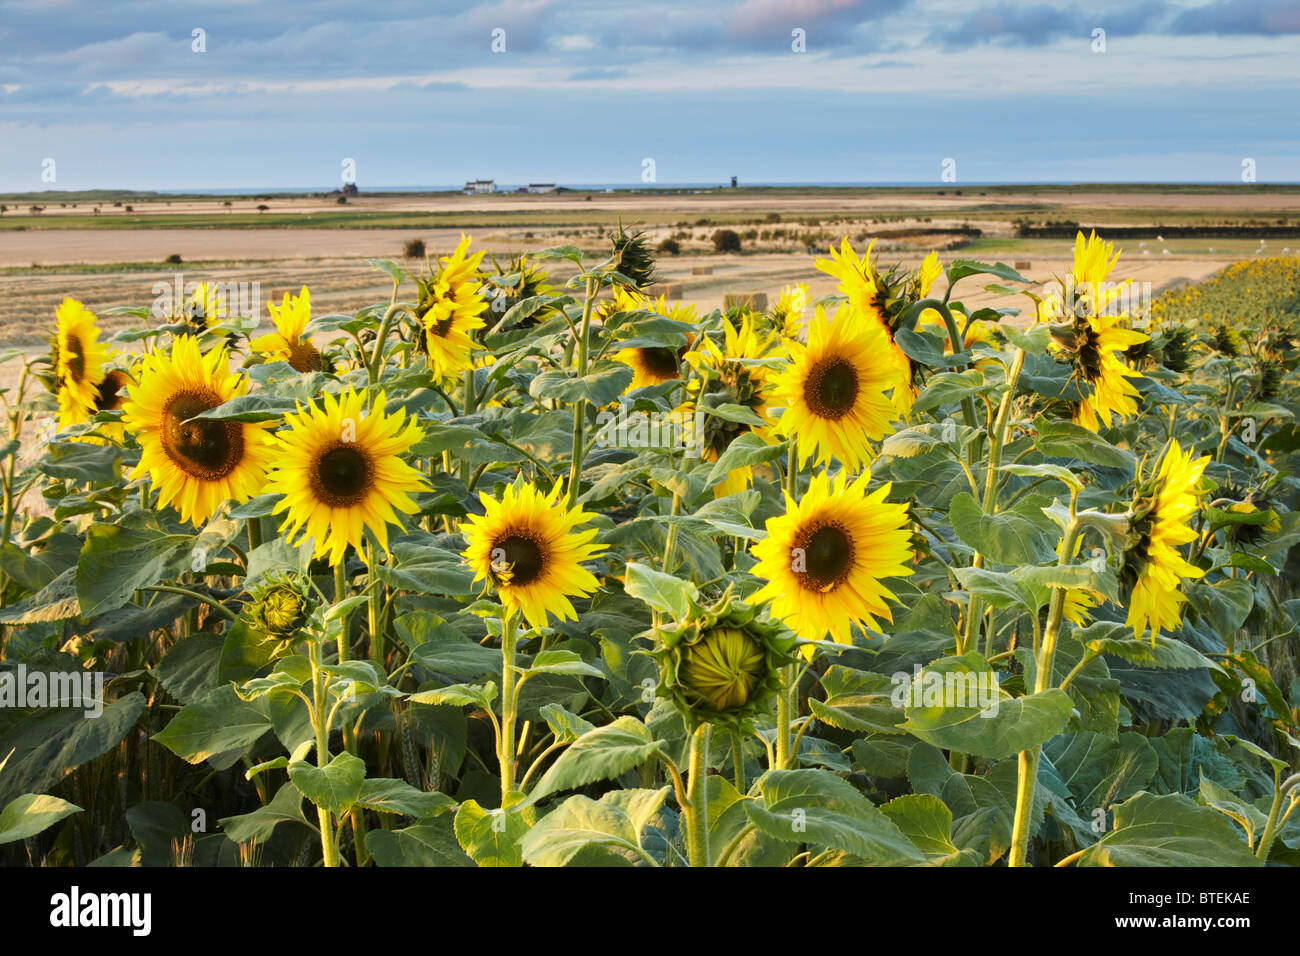 Sunflowers used as conservation headland on a farm in Northumberland Stock Photo